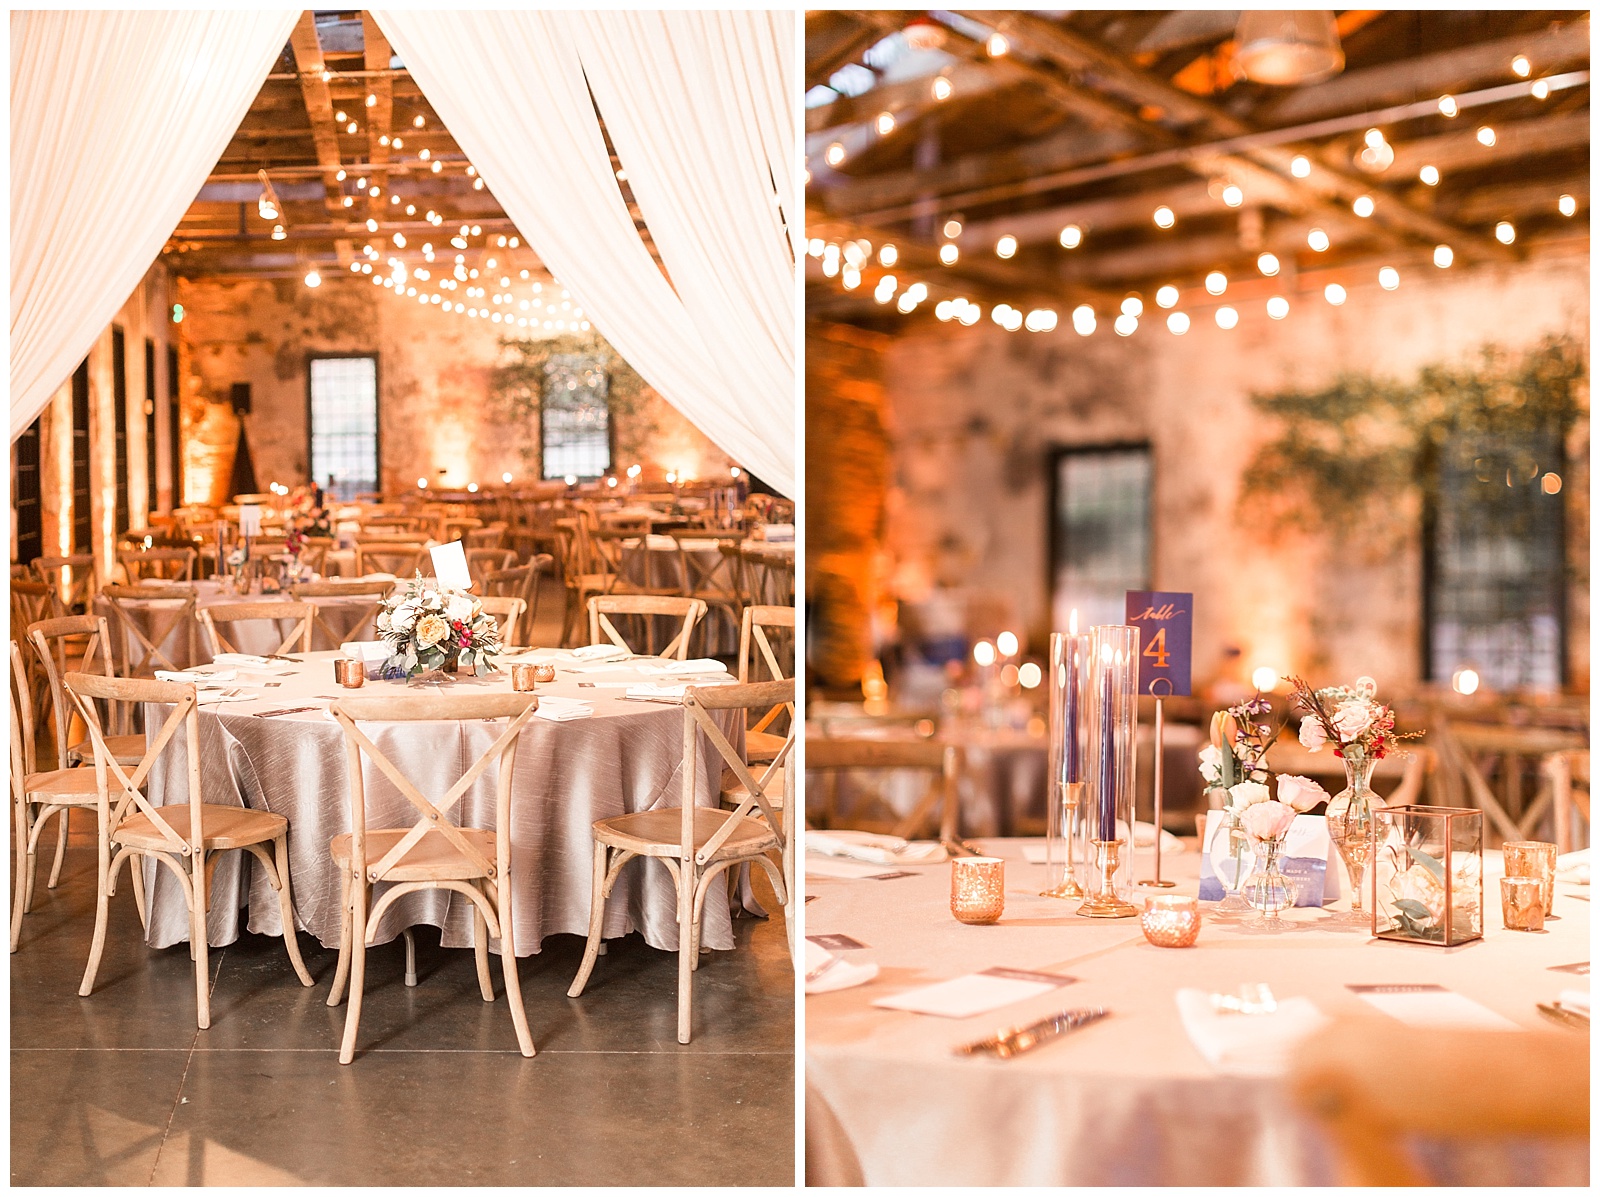 hannah mink photography, baltimore wedding photographer, baltimore, wedding, photographer, mount washington mill dye house, dye house, rustic, industrial, copper, blue, navy, neutral maryland, bouquet, flowers, ceremony, wedding details, reception